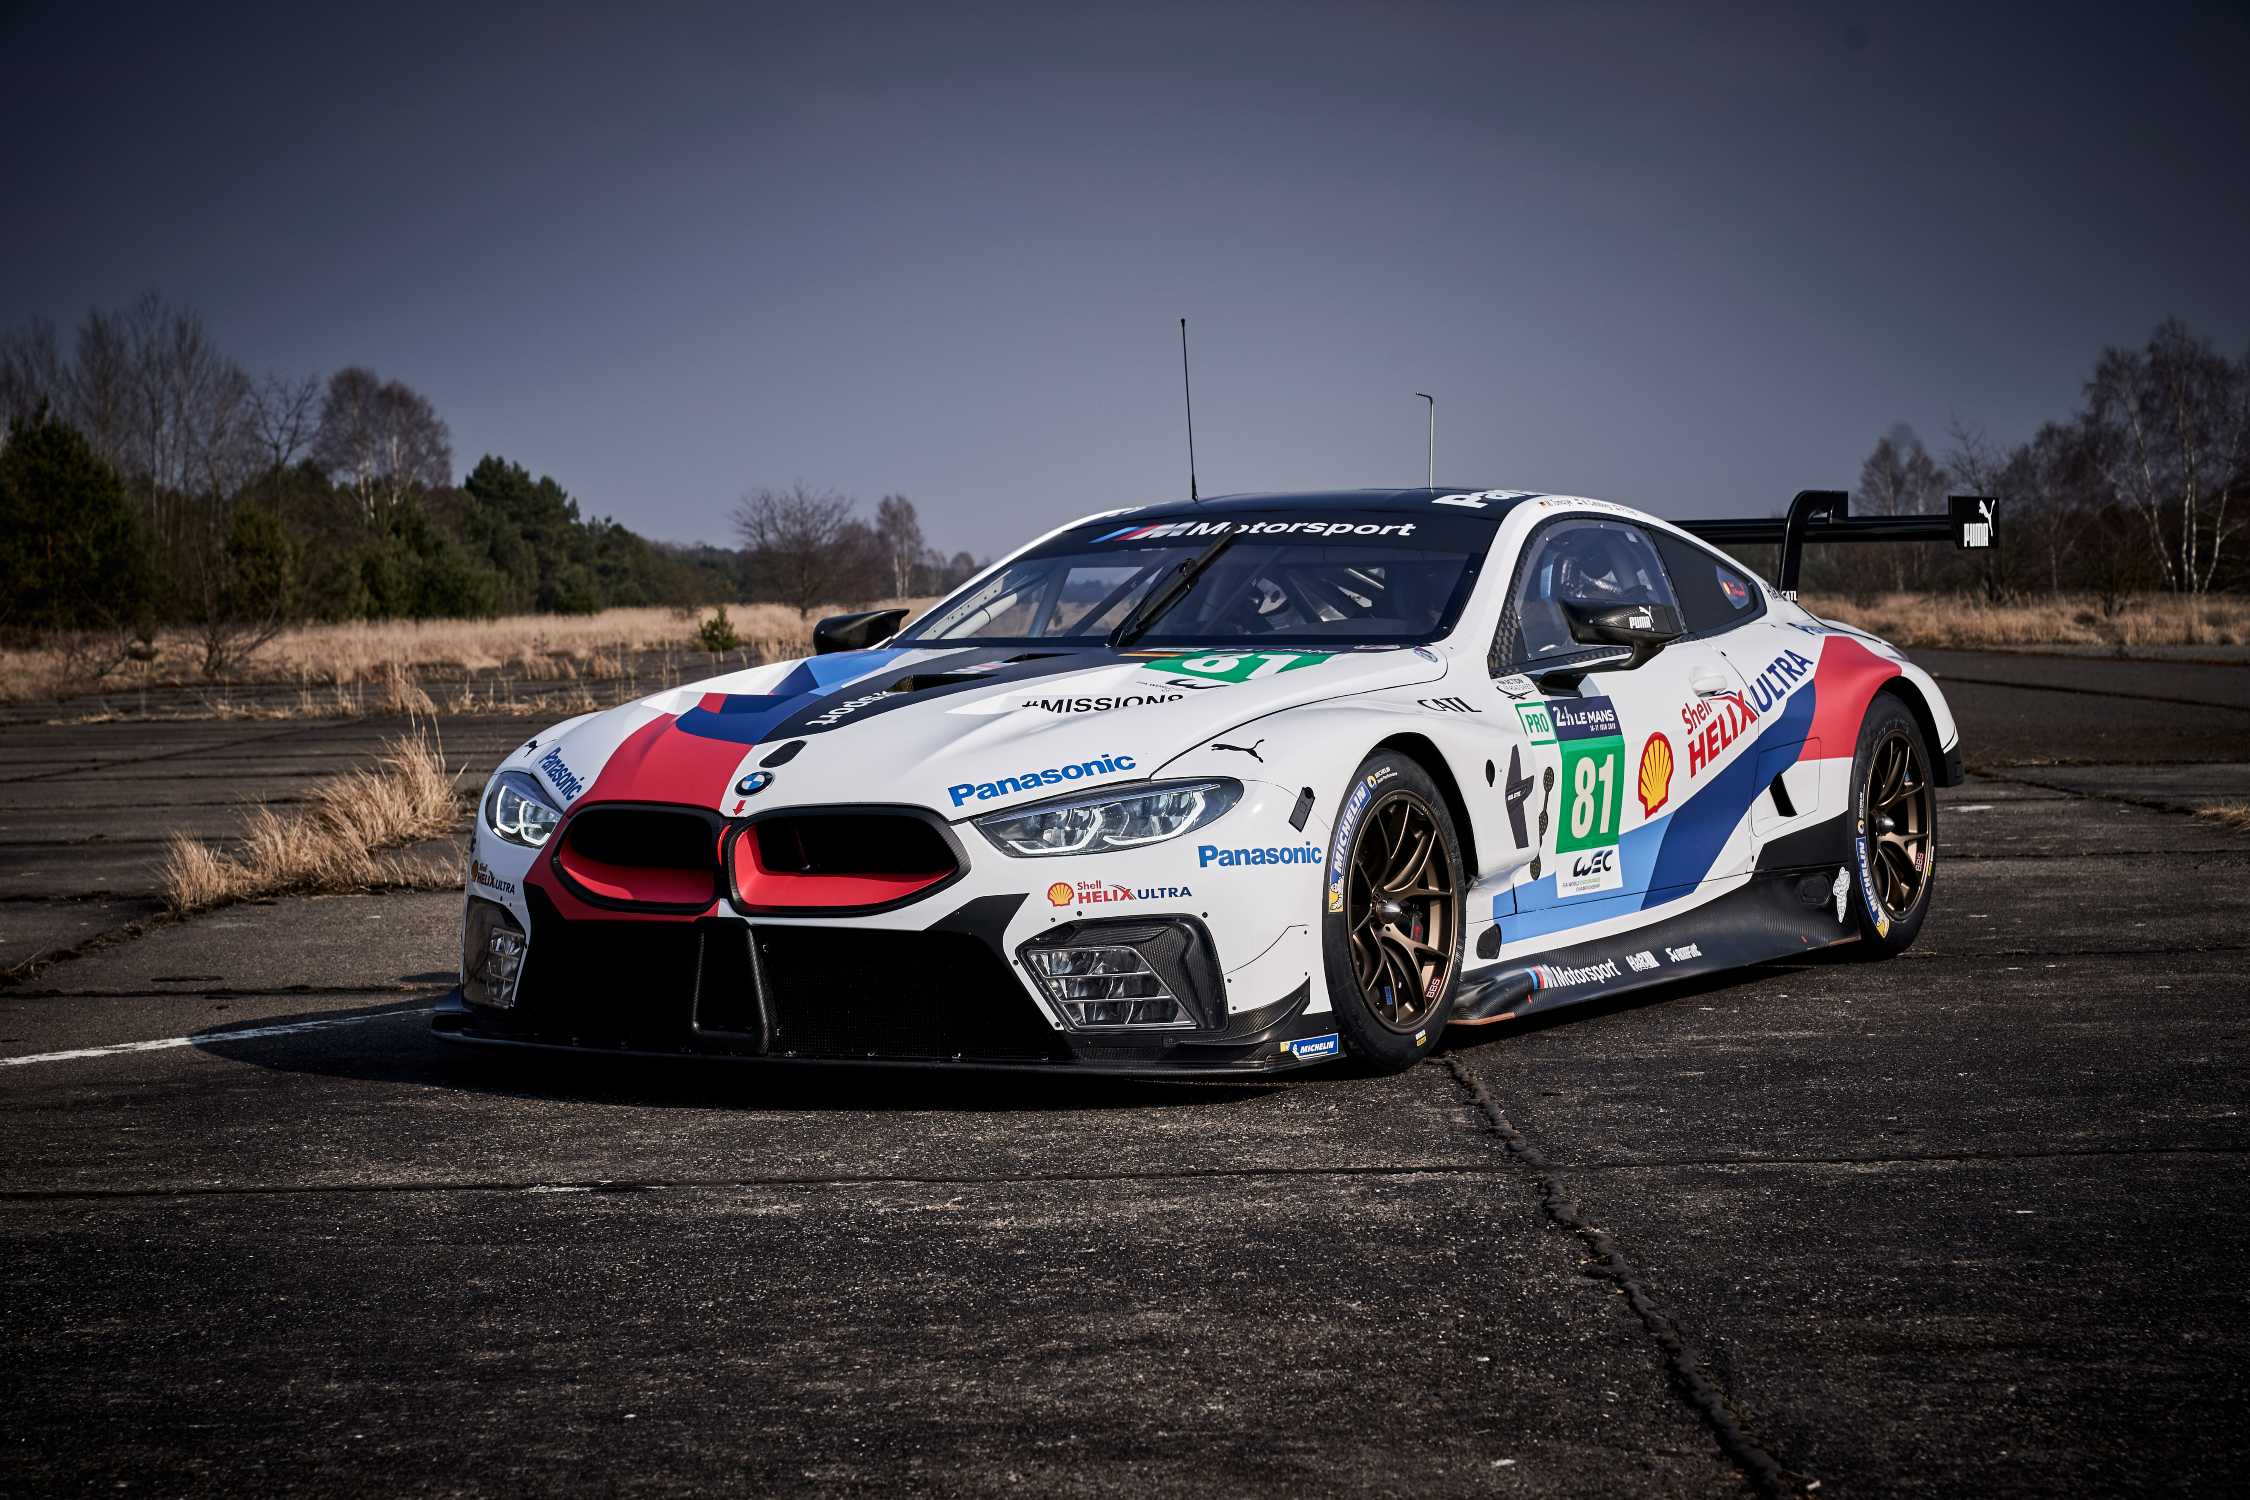 BMW Motorsport returns to the 24 Hours of Le Mans with Panasonic as